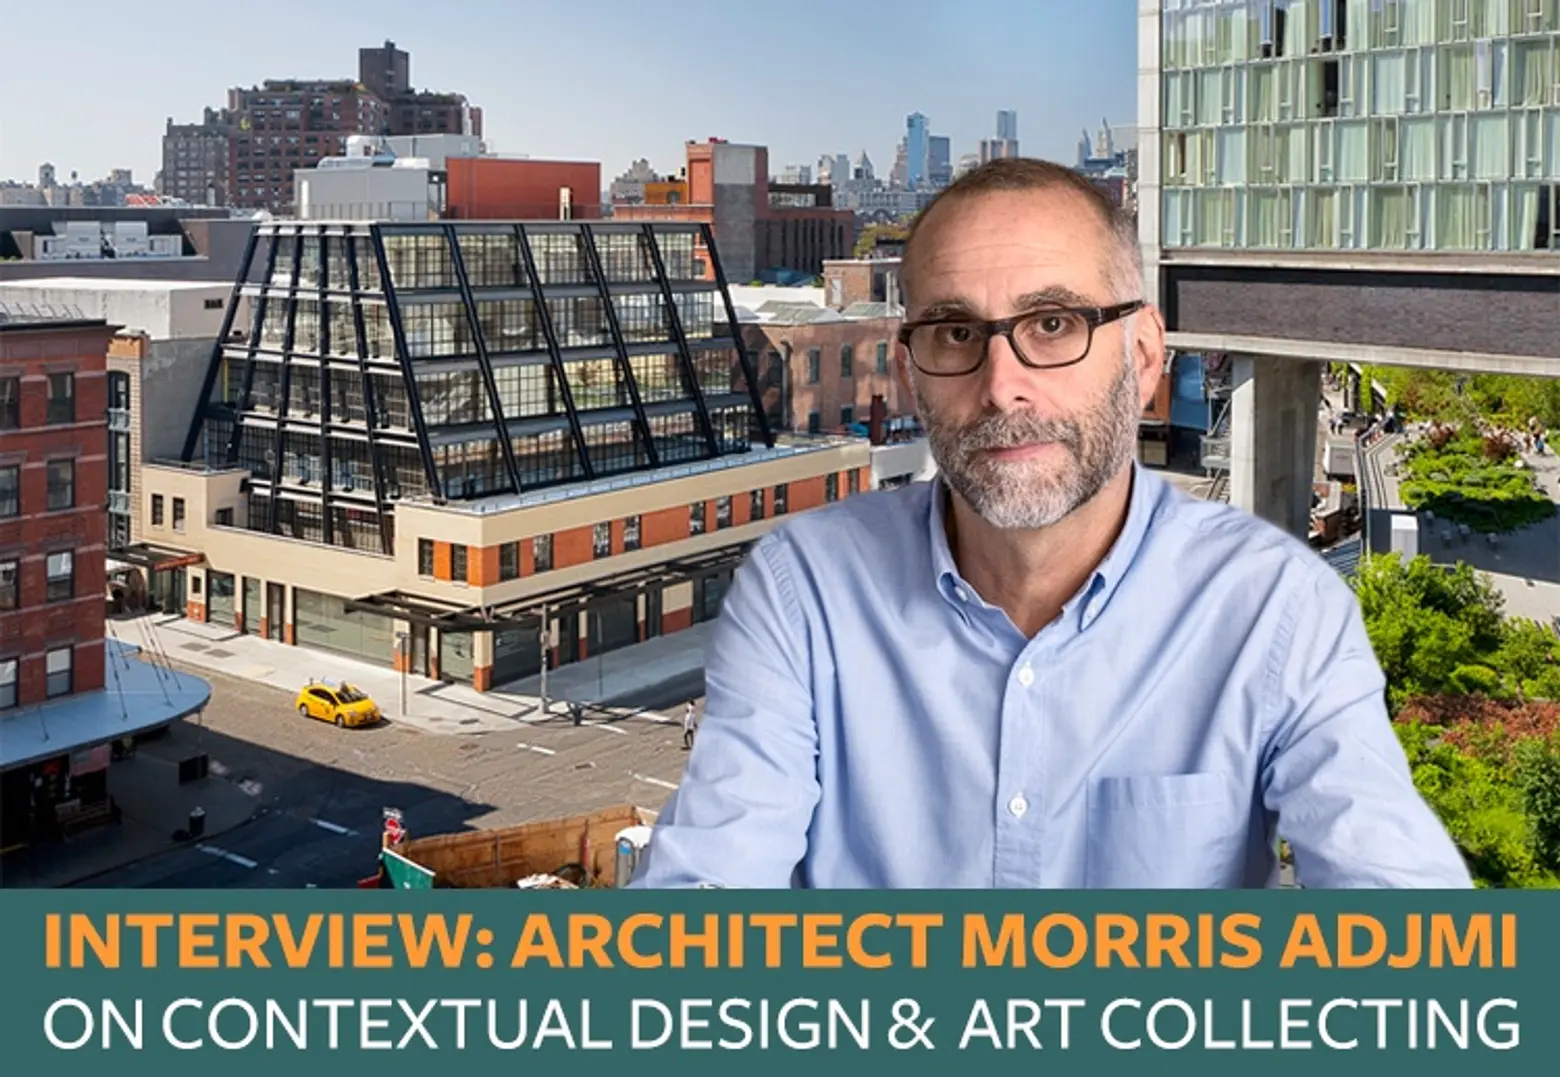 INTERVIEW: Architect Morris Adjmi talks standing out while fitting in and organizing art exhibits